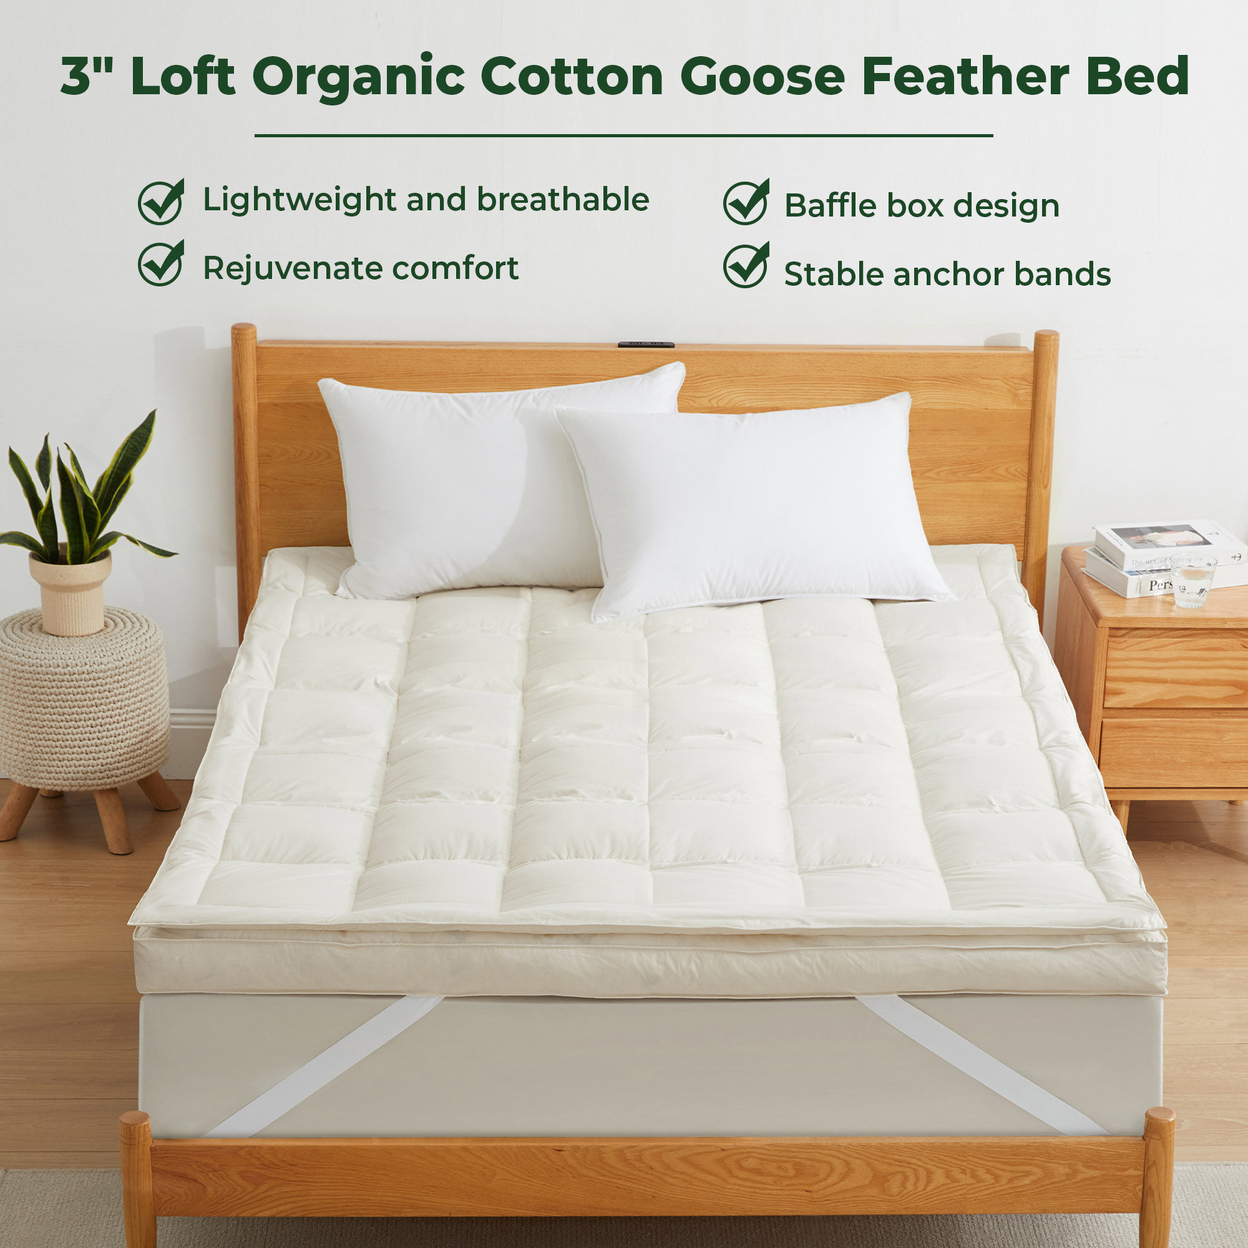 Premium White Goose Feather Mattress Topper, 3 Soft Feather Bed, 300 TC Organic Cotton Cover, Eco-friendly And Breathable - Full, White